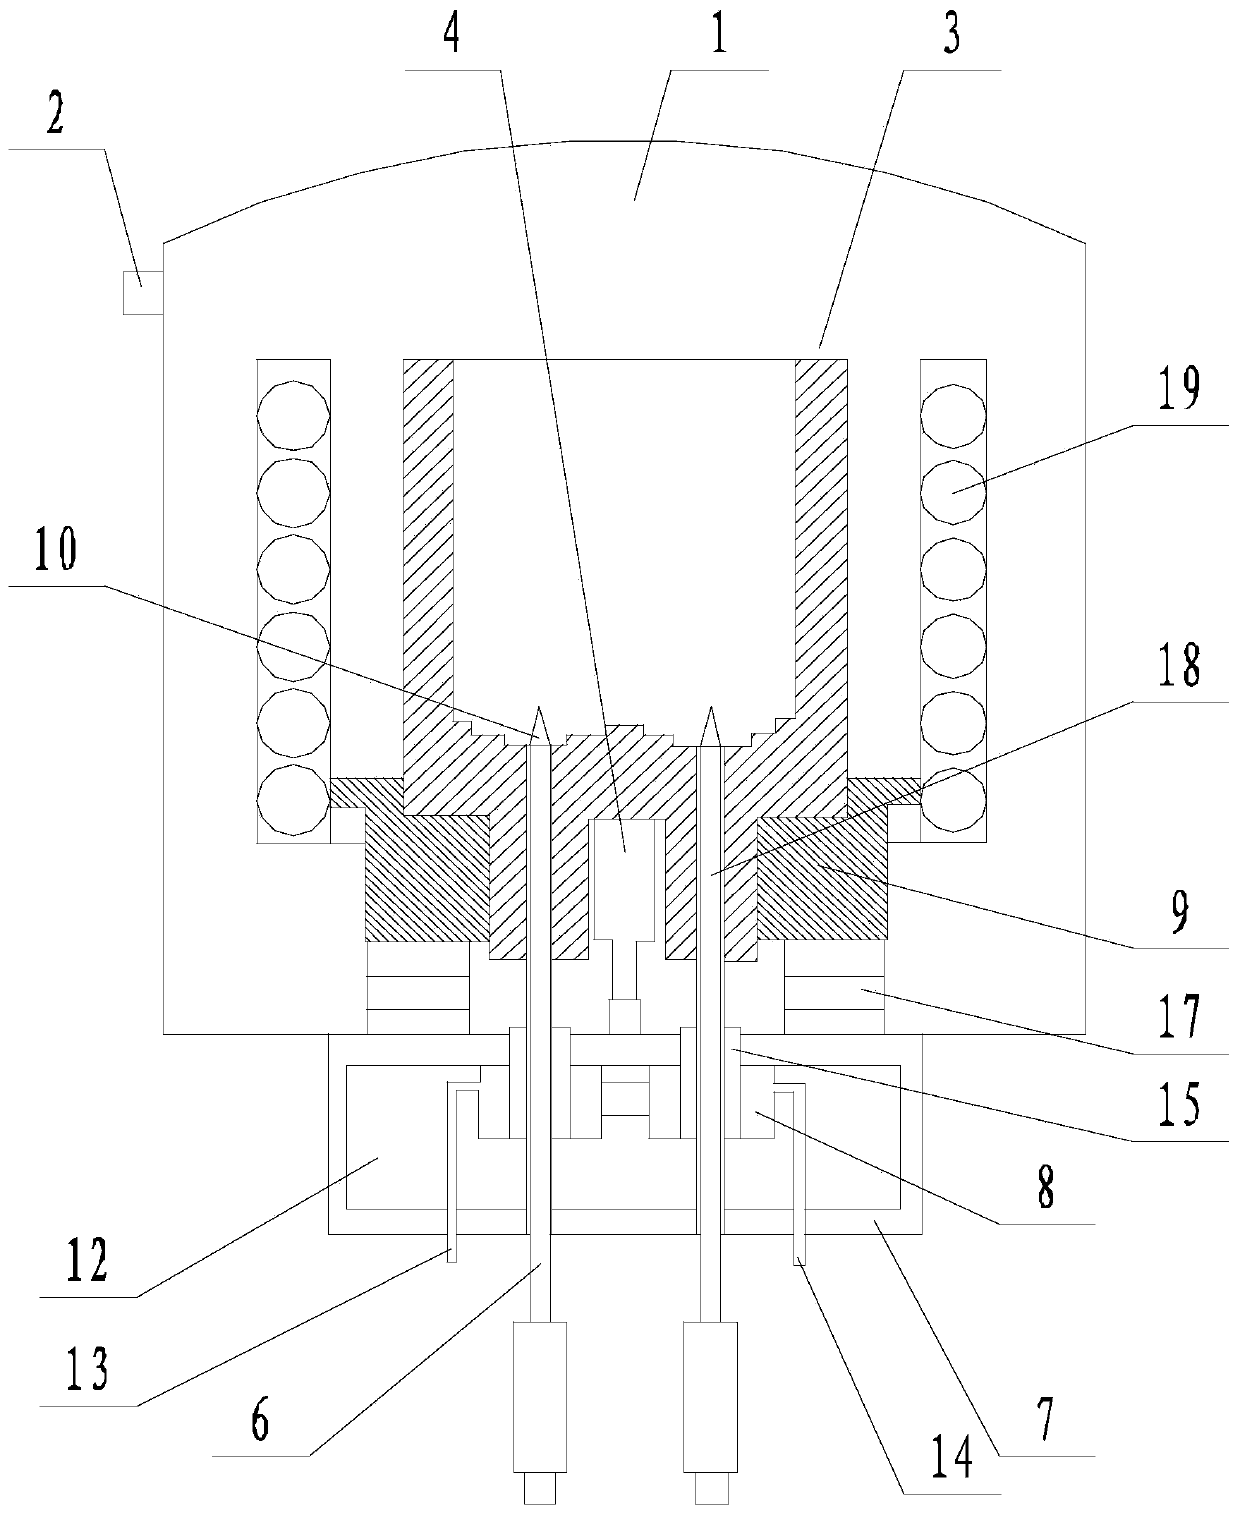 A directional drawing and discharging vacuum melting furnace